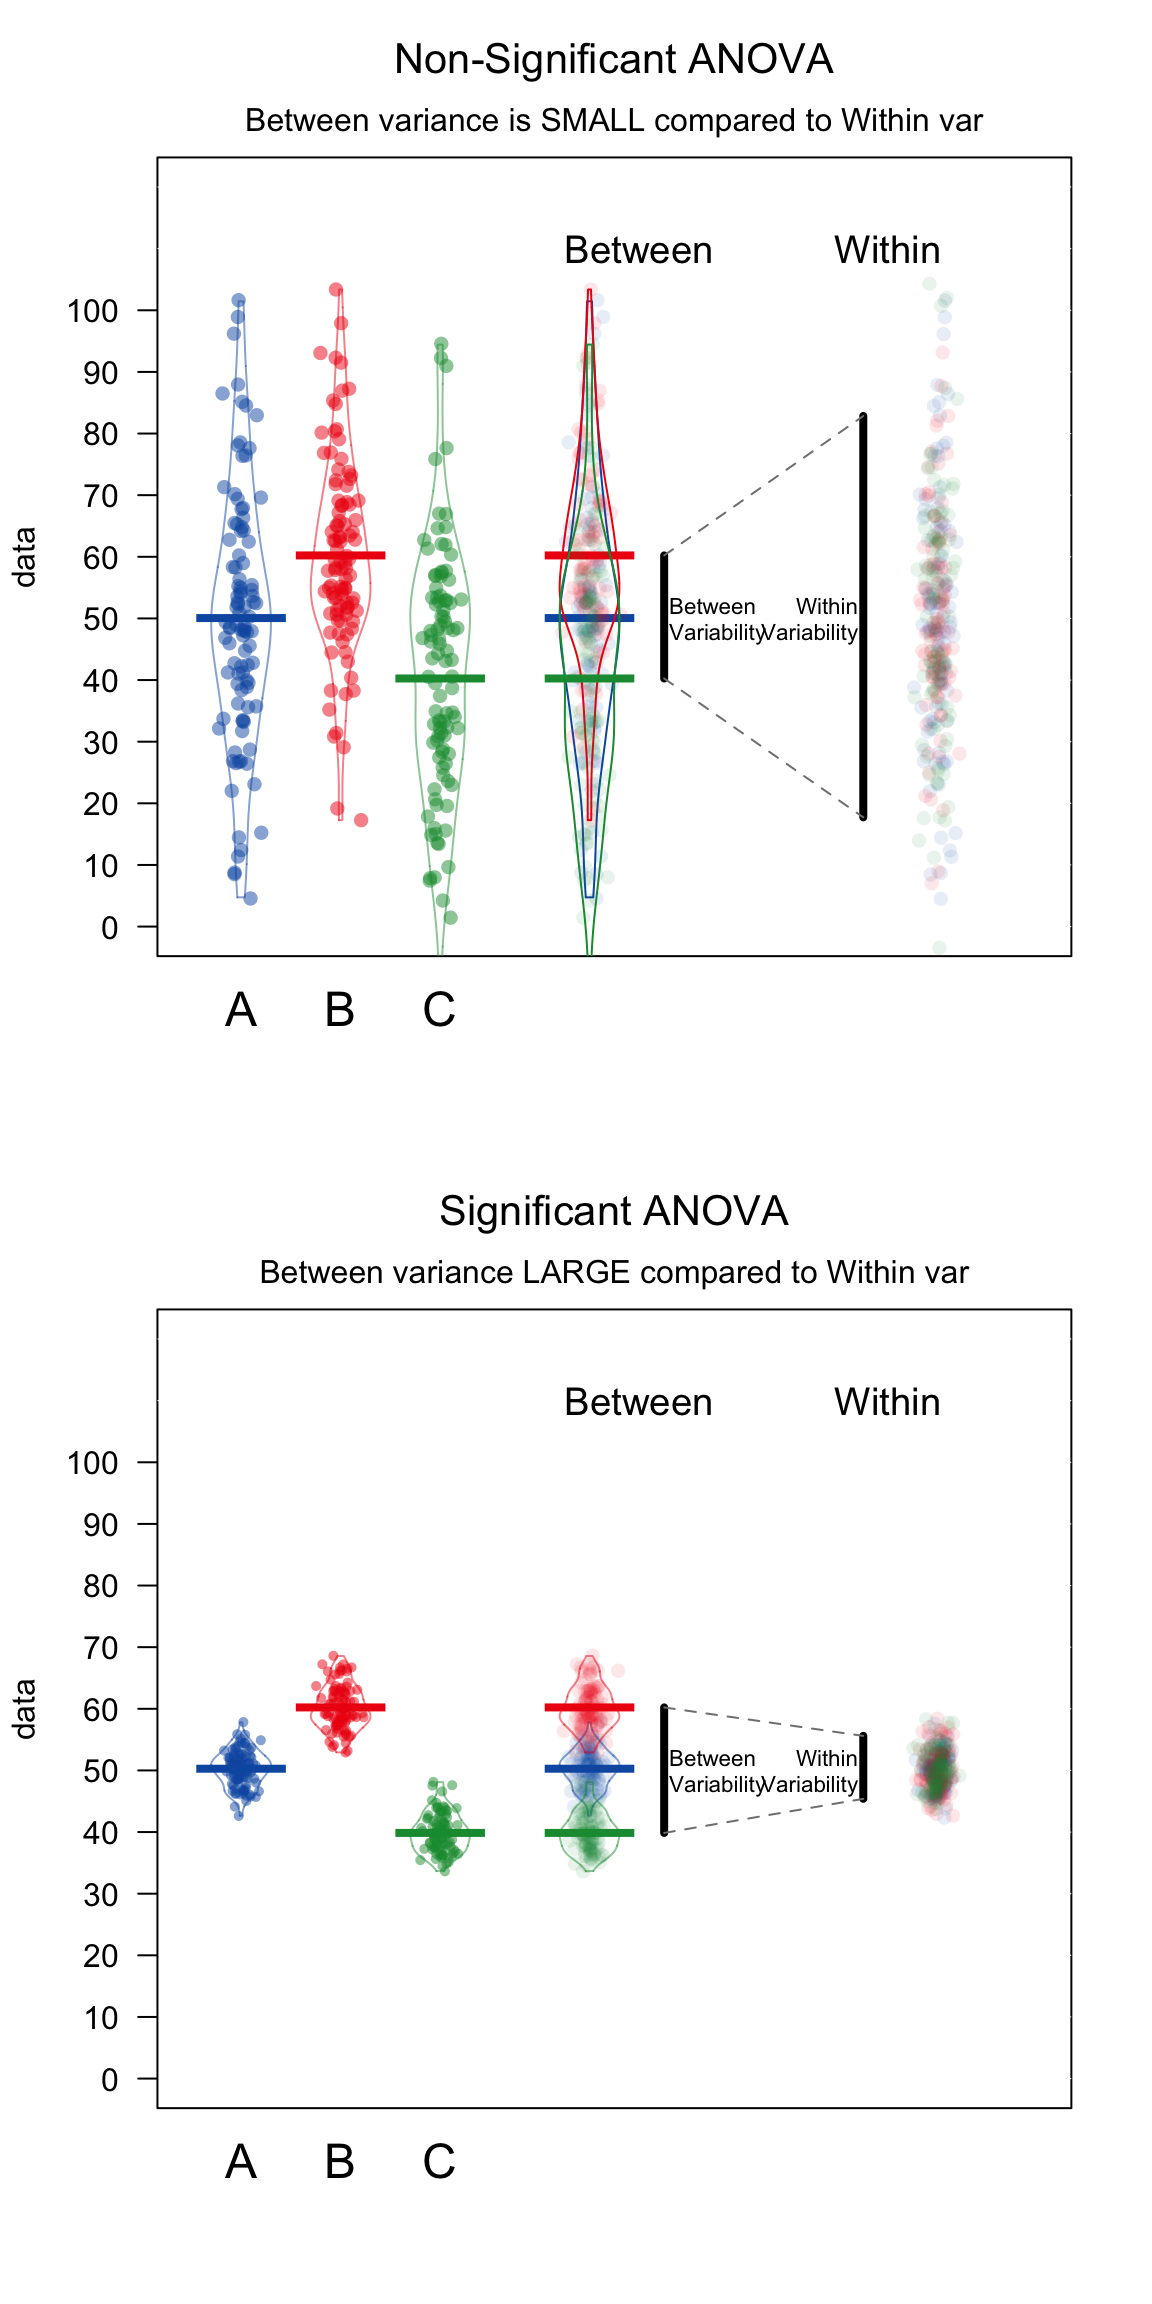 How ANOVAs work. ANOVA compares the variability between groups (i.e.; the differences in the group means) to the variability within groups (i.e.; how much individuals generally differ from each other). If the variability between groups is small compared to the variability between groups, ANOVA will return a non-significant result -- suggesting that the groups are not really different. If the variability between groups is large compared to the variability within groups, ANOVA will return a significant result -- indicating that the groups are really different.